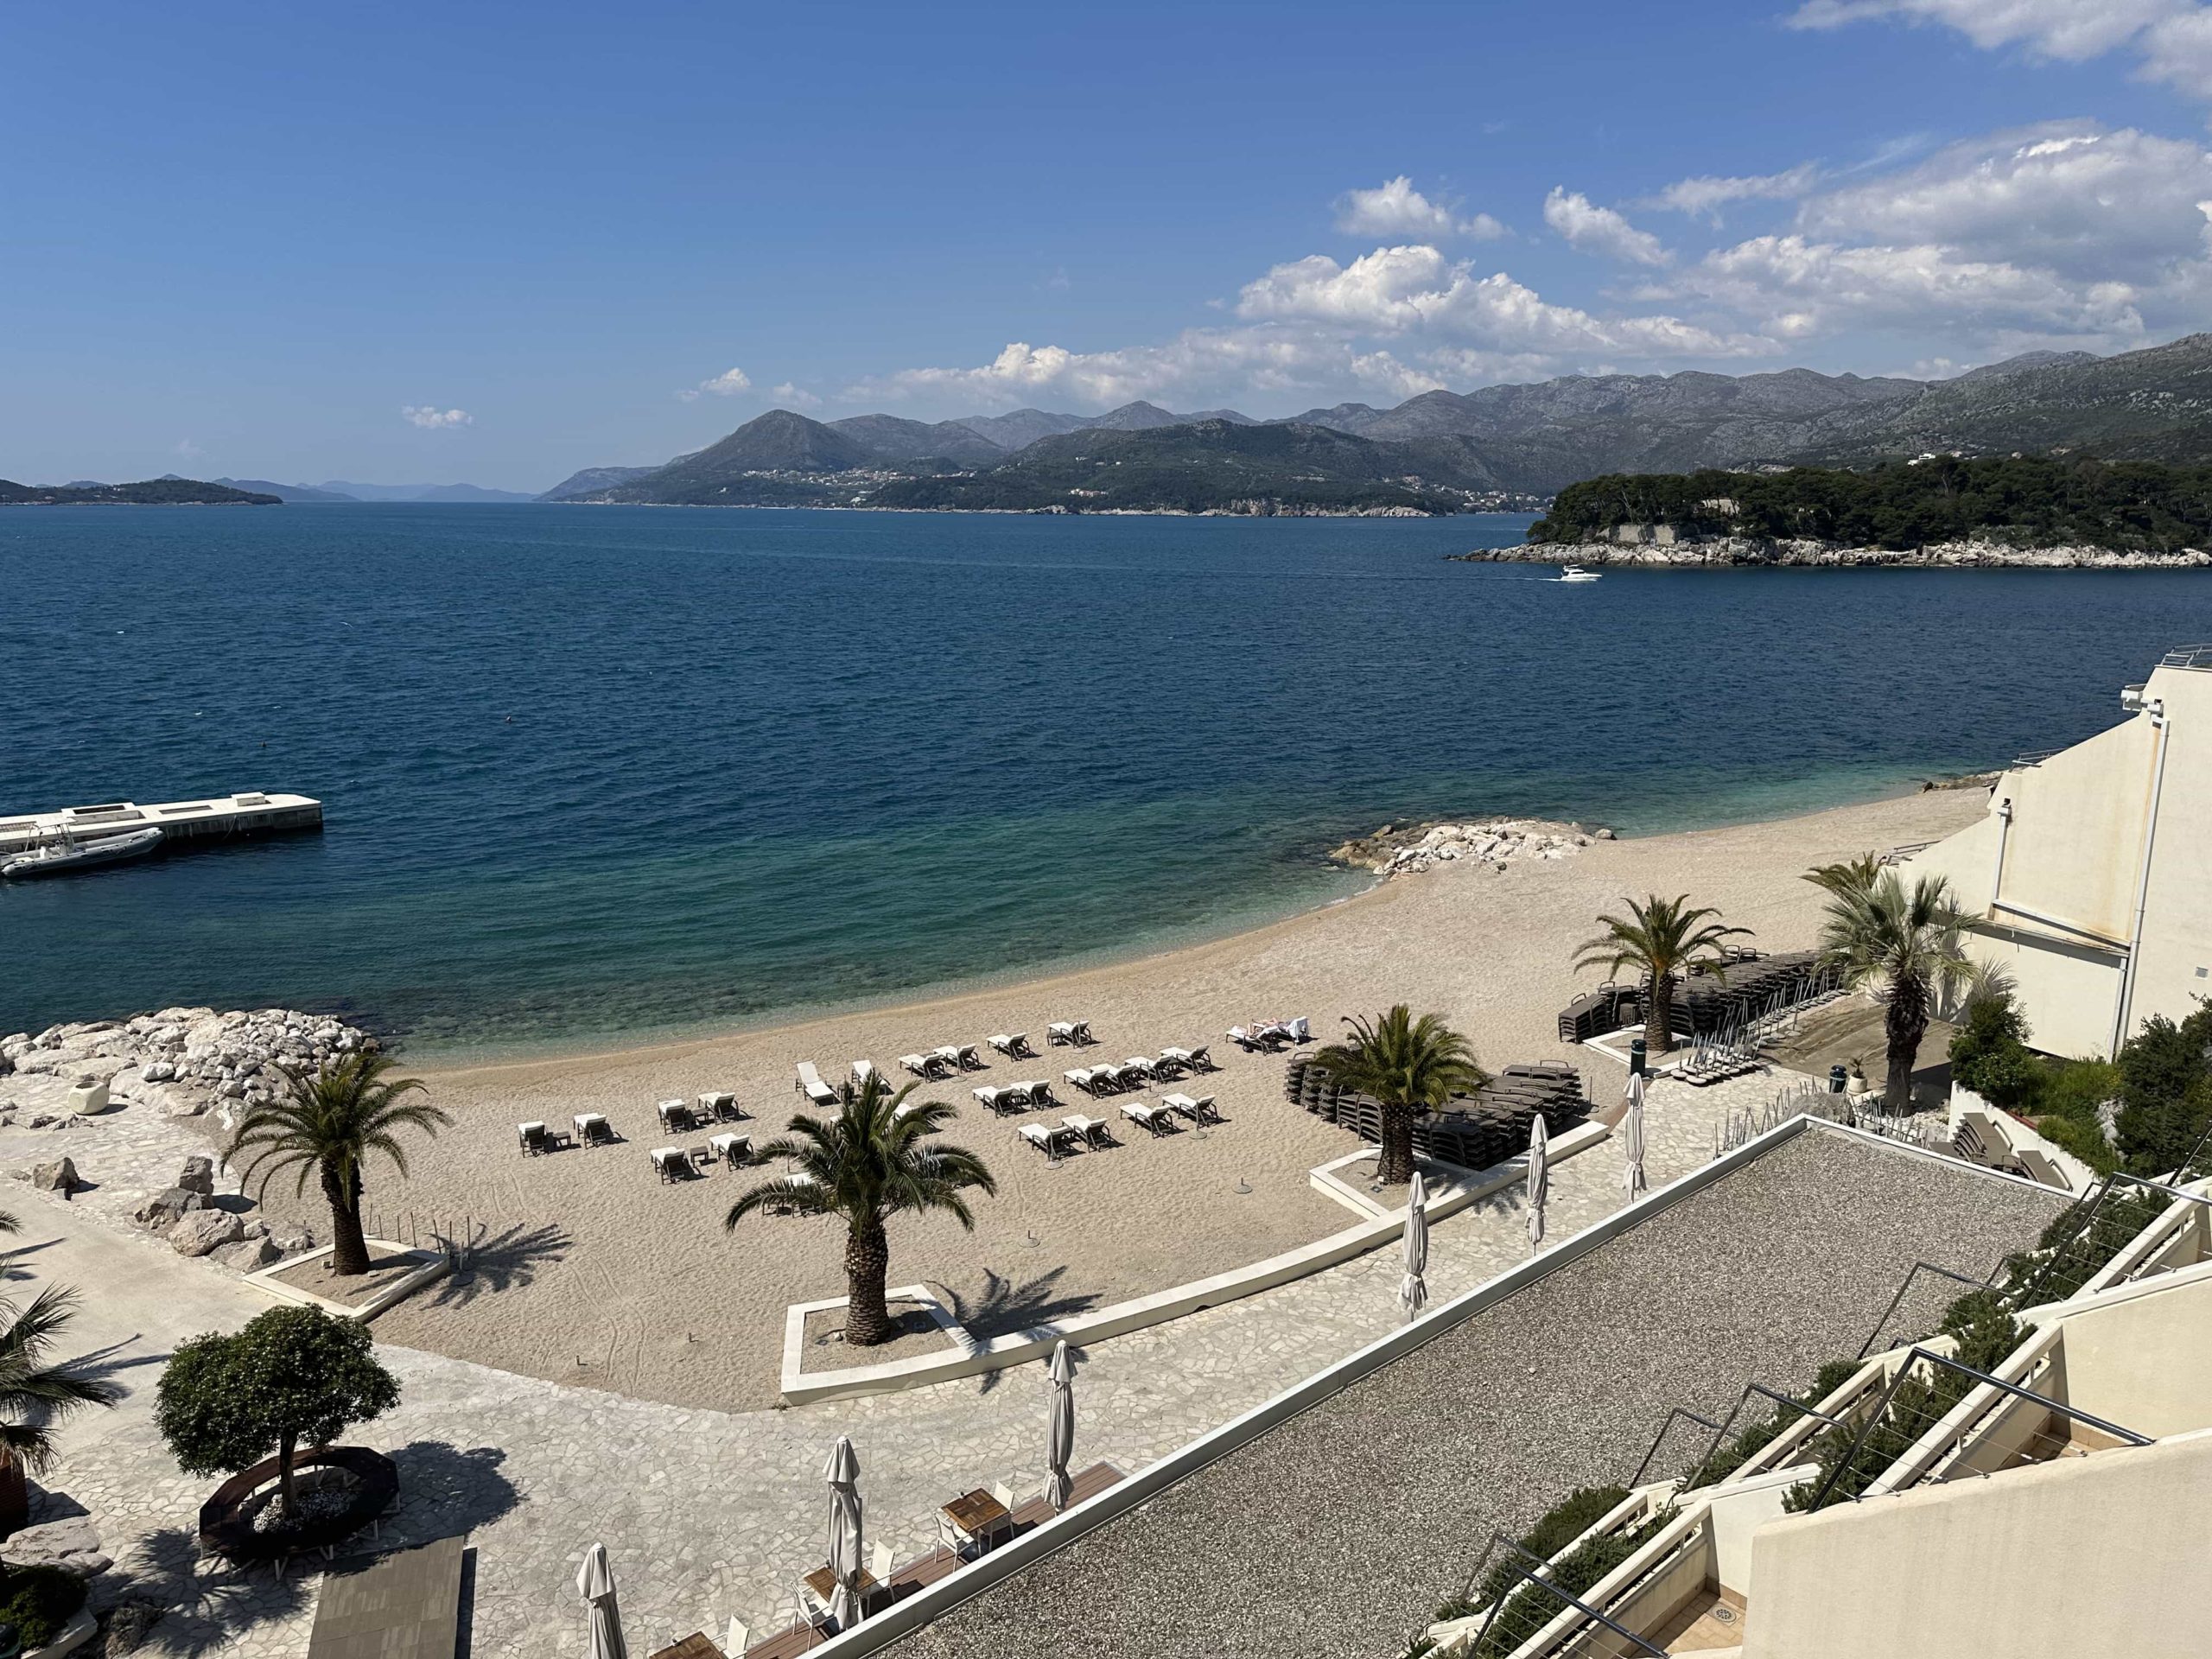 A balcony view overlooking a private hotel beach and the Adriatic Sea